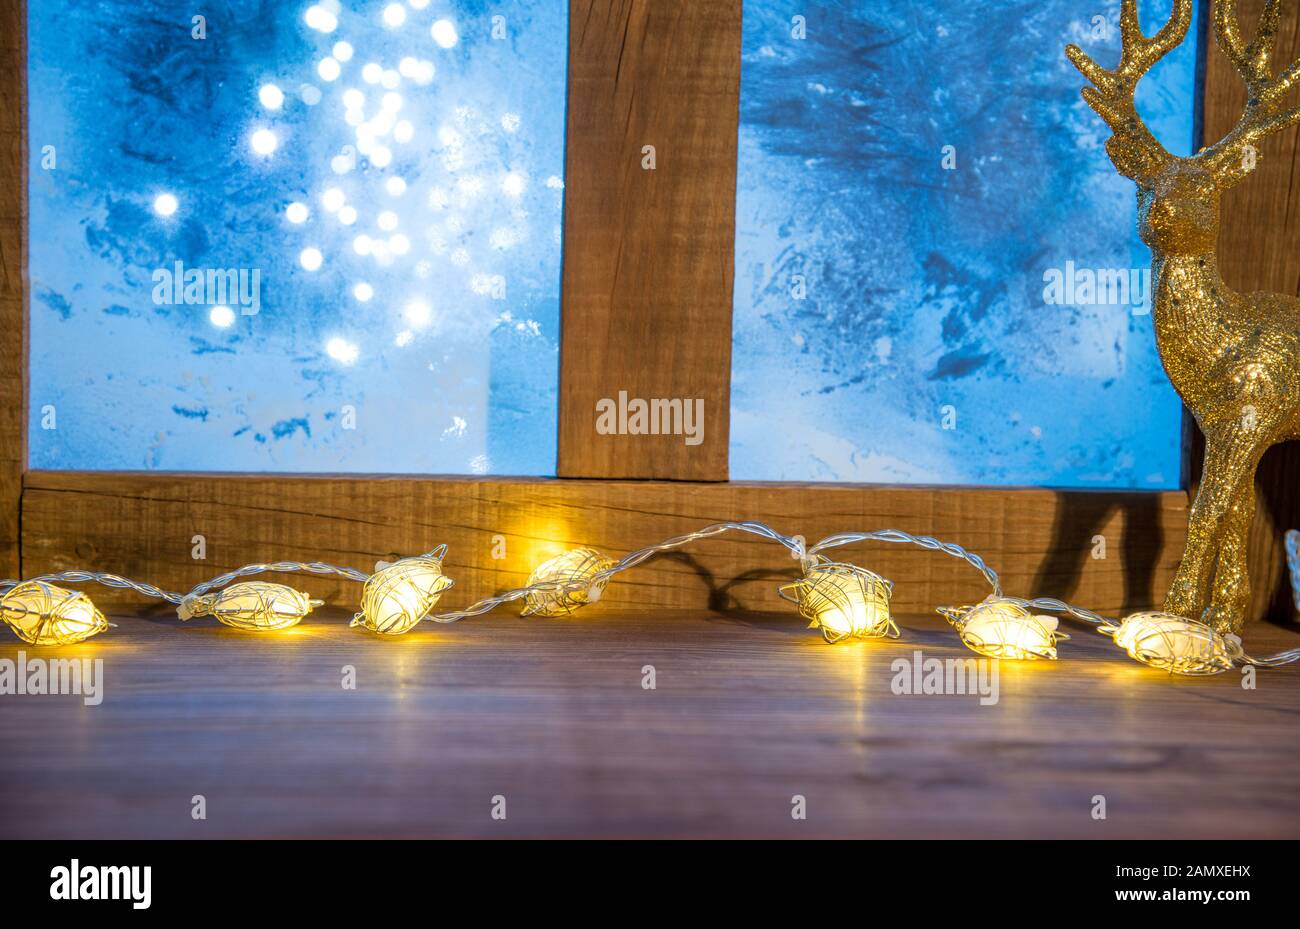 christmas cozy interior with window sill illuminated with lights Stock Photo